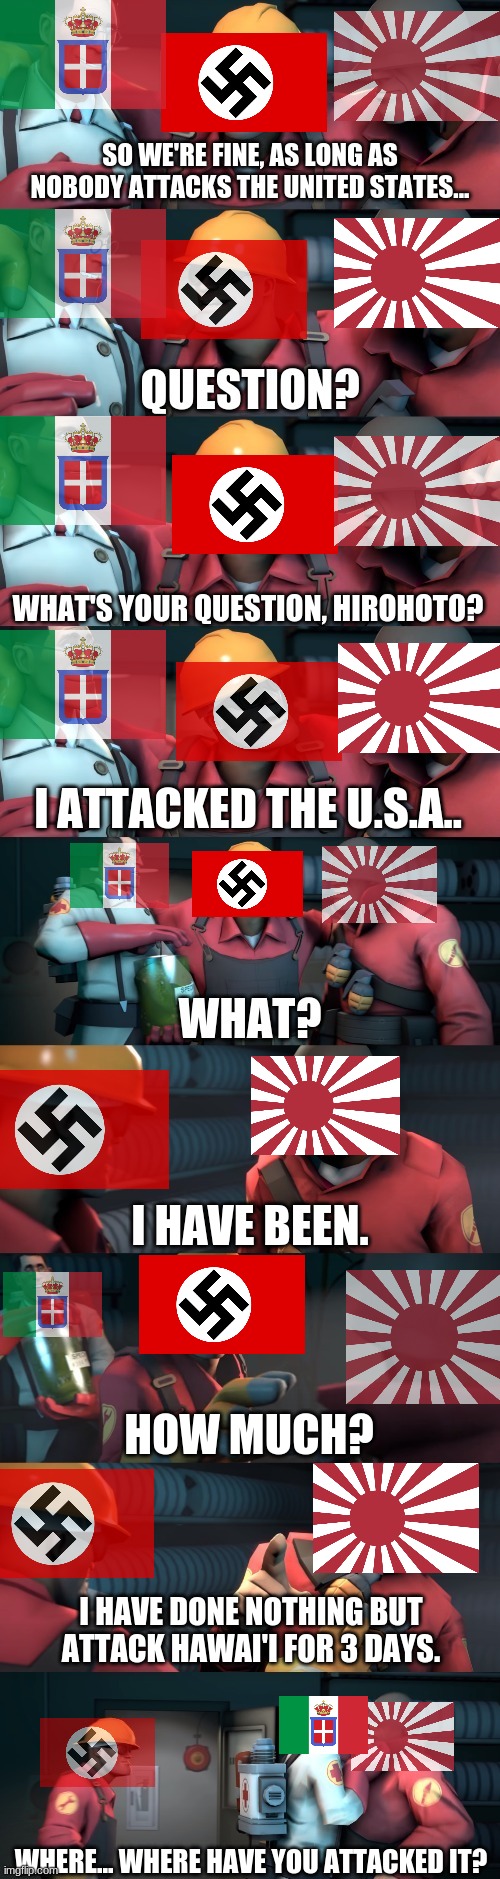 When Japan attacks the U.S.A.: | SO WE'RE FINE, AS LONG AS NOBODY ATTACKS THE UNITED STATES... WHAT'S YOUR QUESTION, HIROHOTO? I ATTACKED THE U.S.A.. I HAVE BEEN. HOW MUCH? I HAVE DONE NOTHING BUT ATTACK HAWAI'I FOR 3 DAYS. WHERE... WHERE HAVE YOU ATTACKED IT? | image tagged in tf2 teleport bread meme english,axis,ww2,germany,italy,japan | made w/ Imgflip meme maker